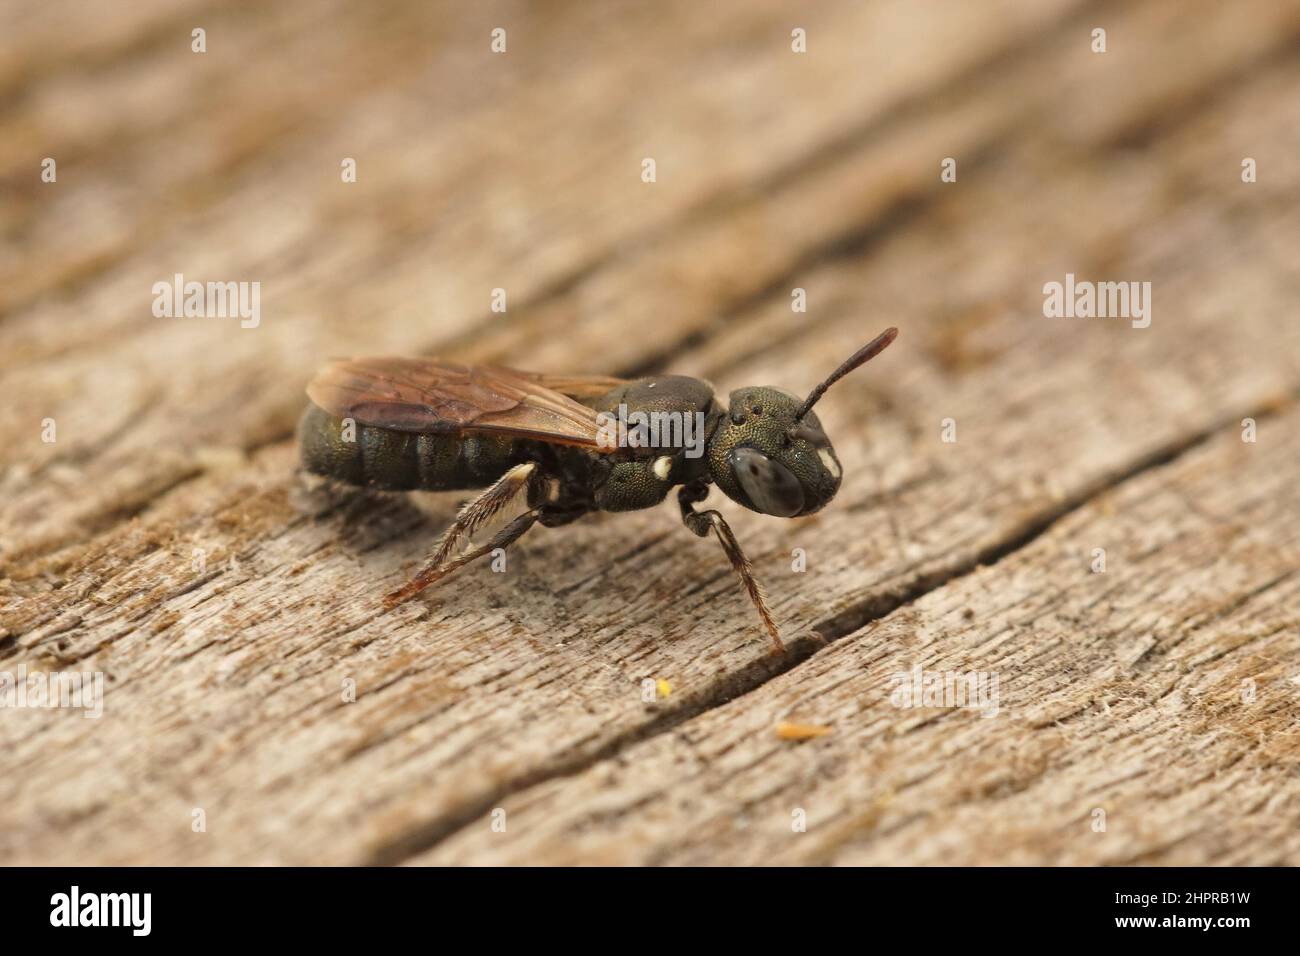 Closeup on a colorful Little Blue Carpenter Bee, Ceratina cyanea sitting on wood Stock Photo